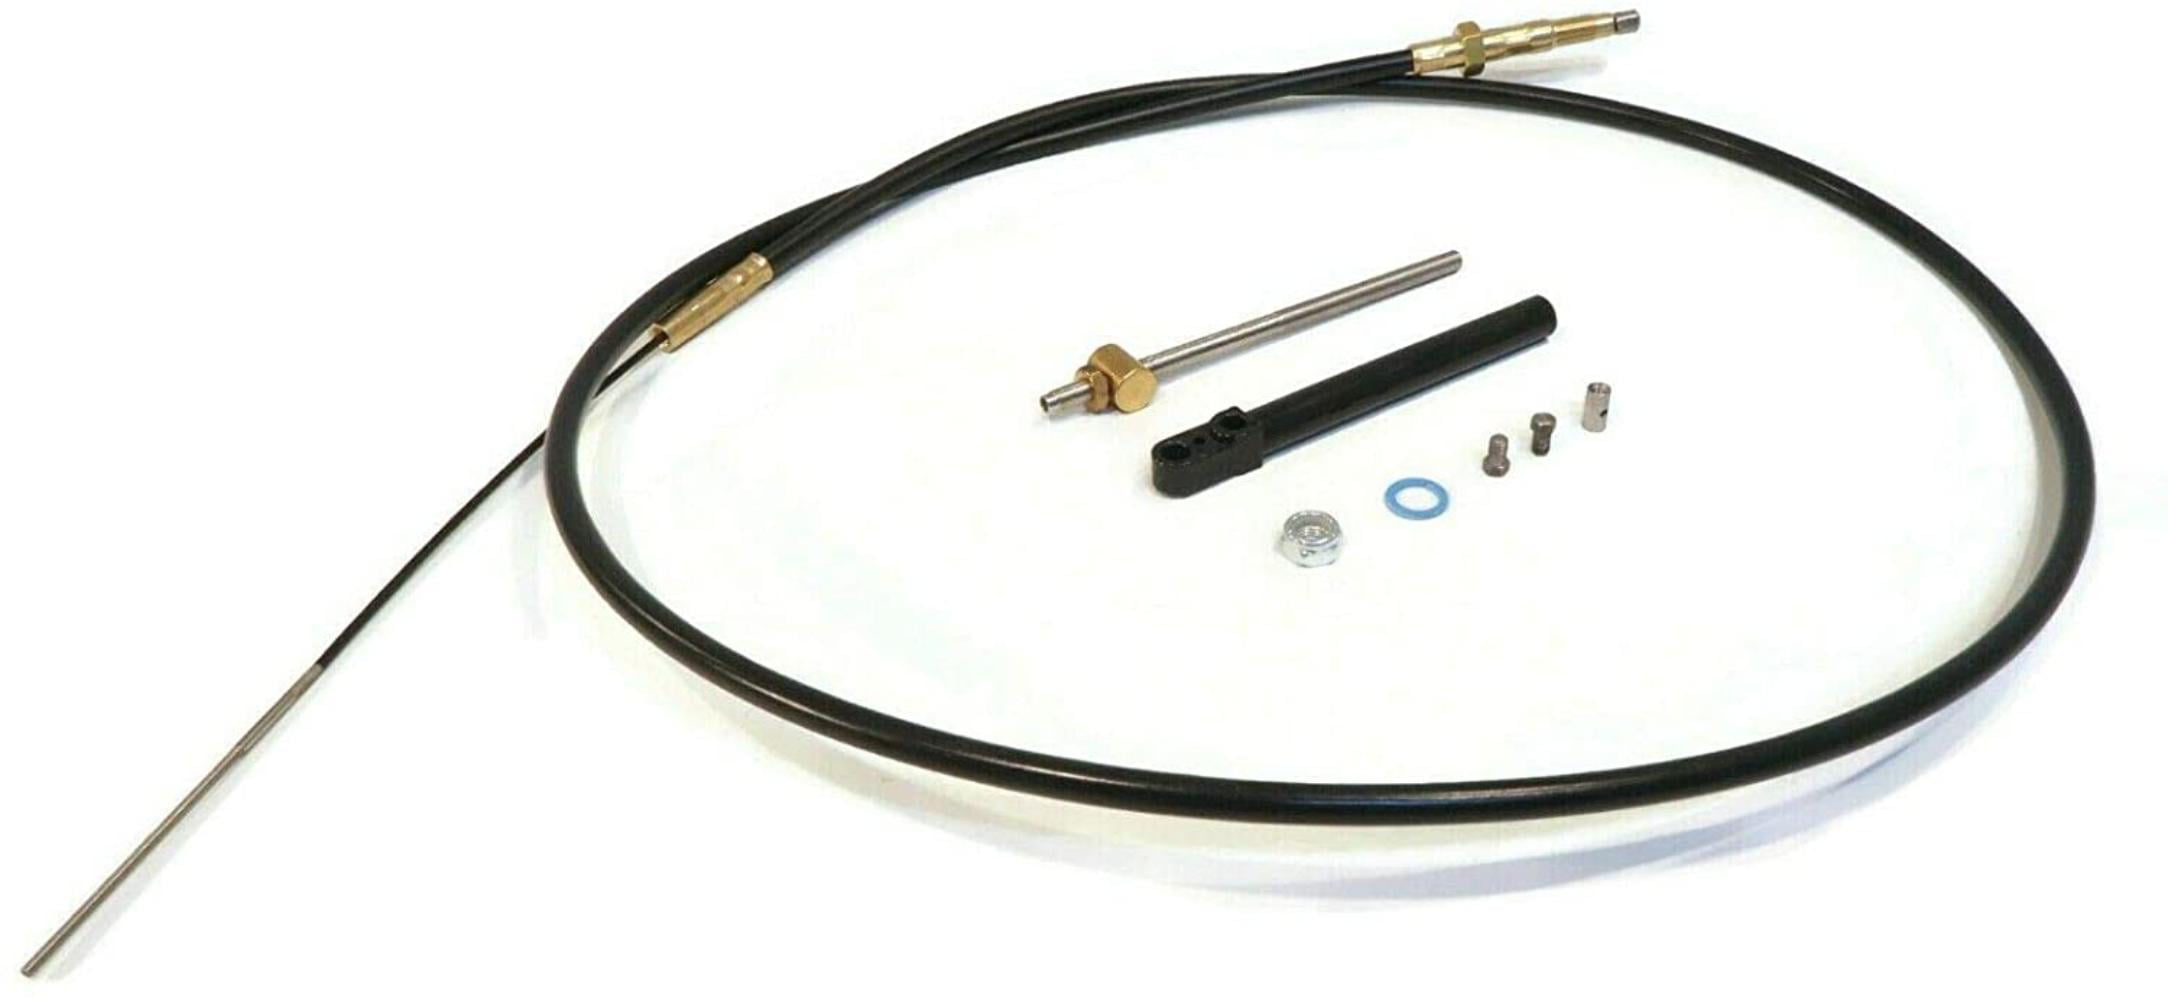 BRAVO 1  2  3  LOWER SHIFT CABLE KIT WITH HARDWARE one two three fast shipping 